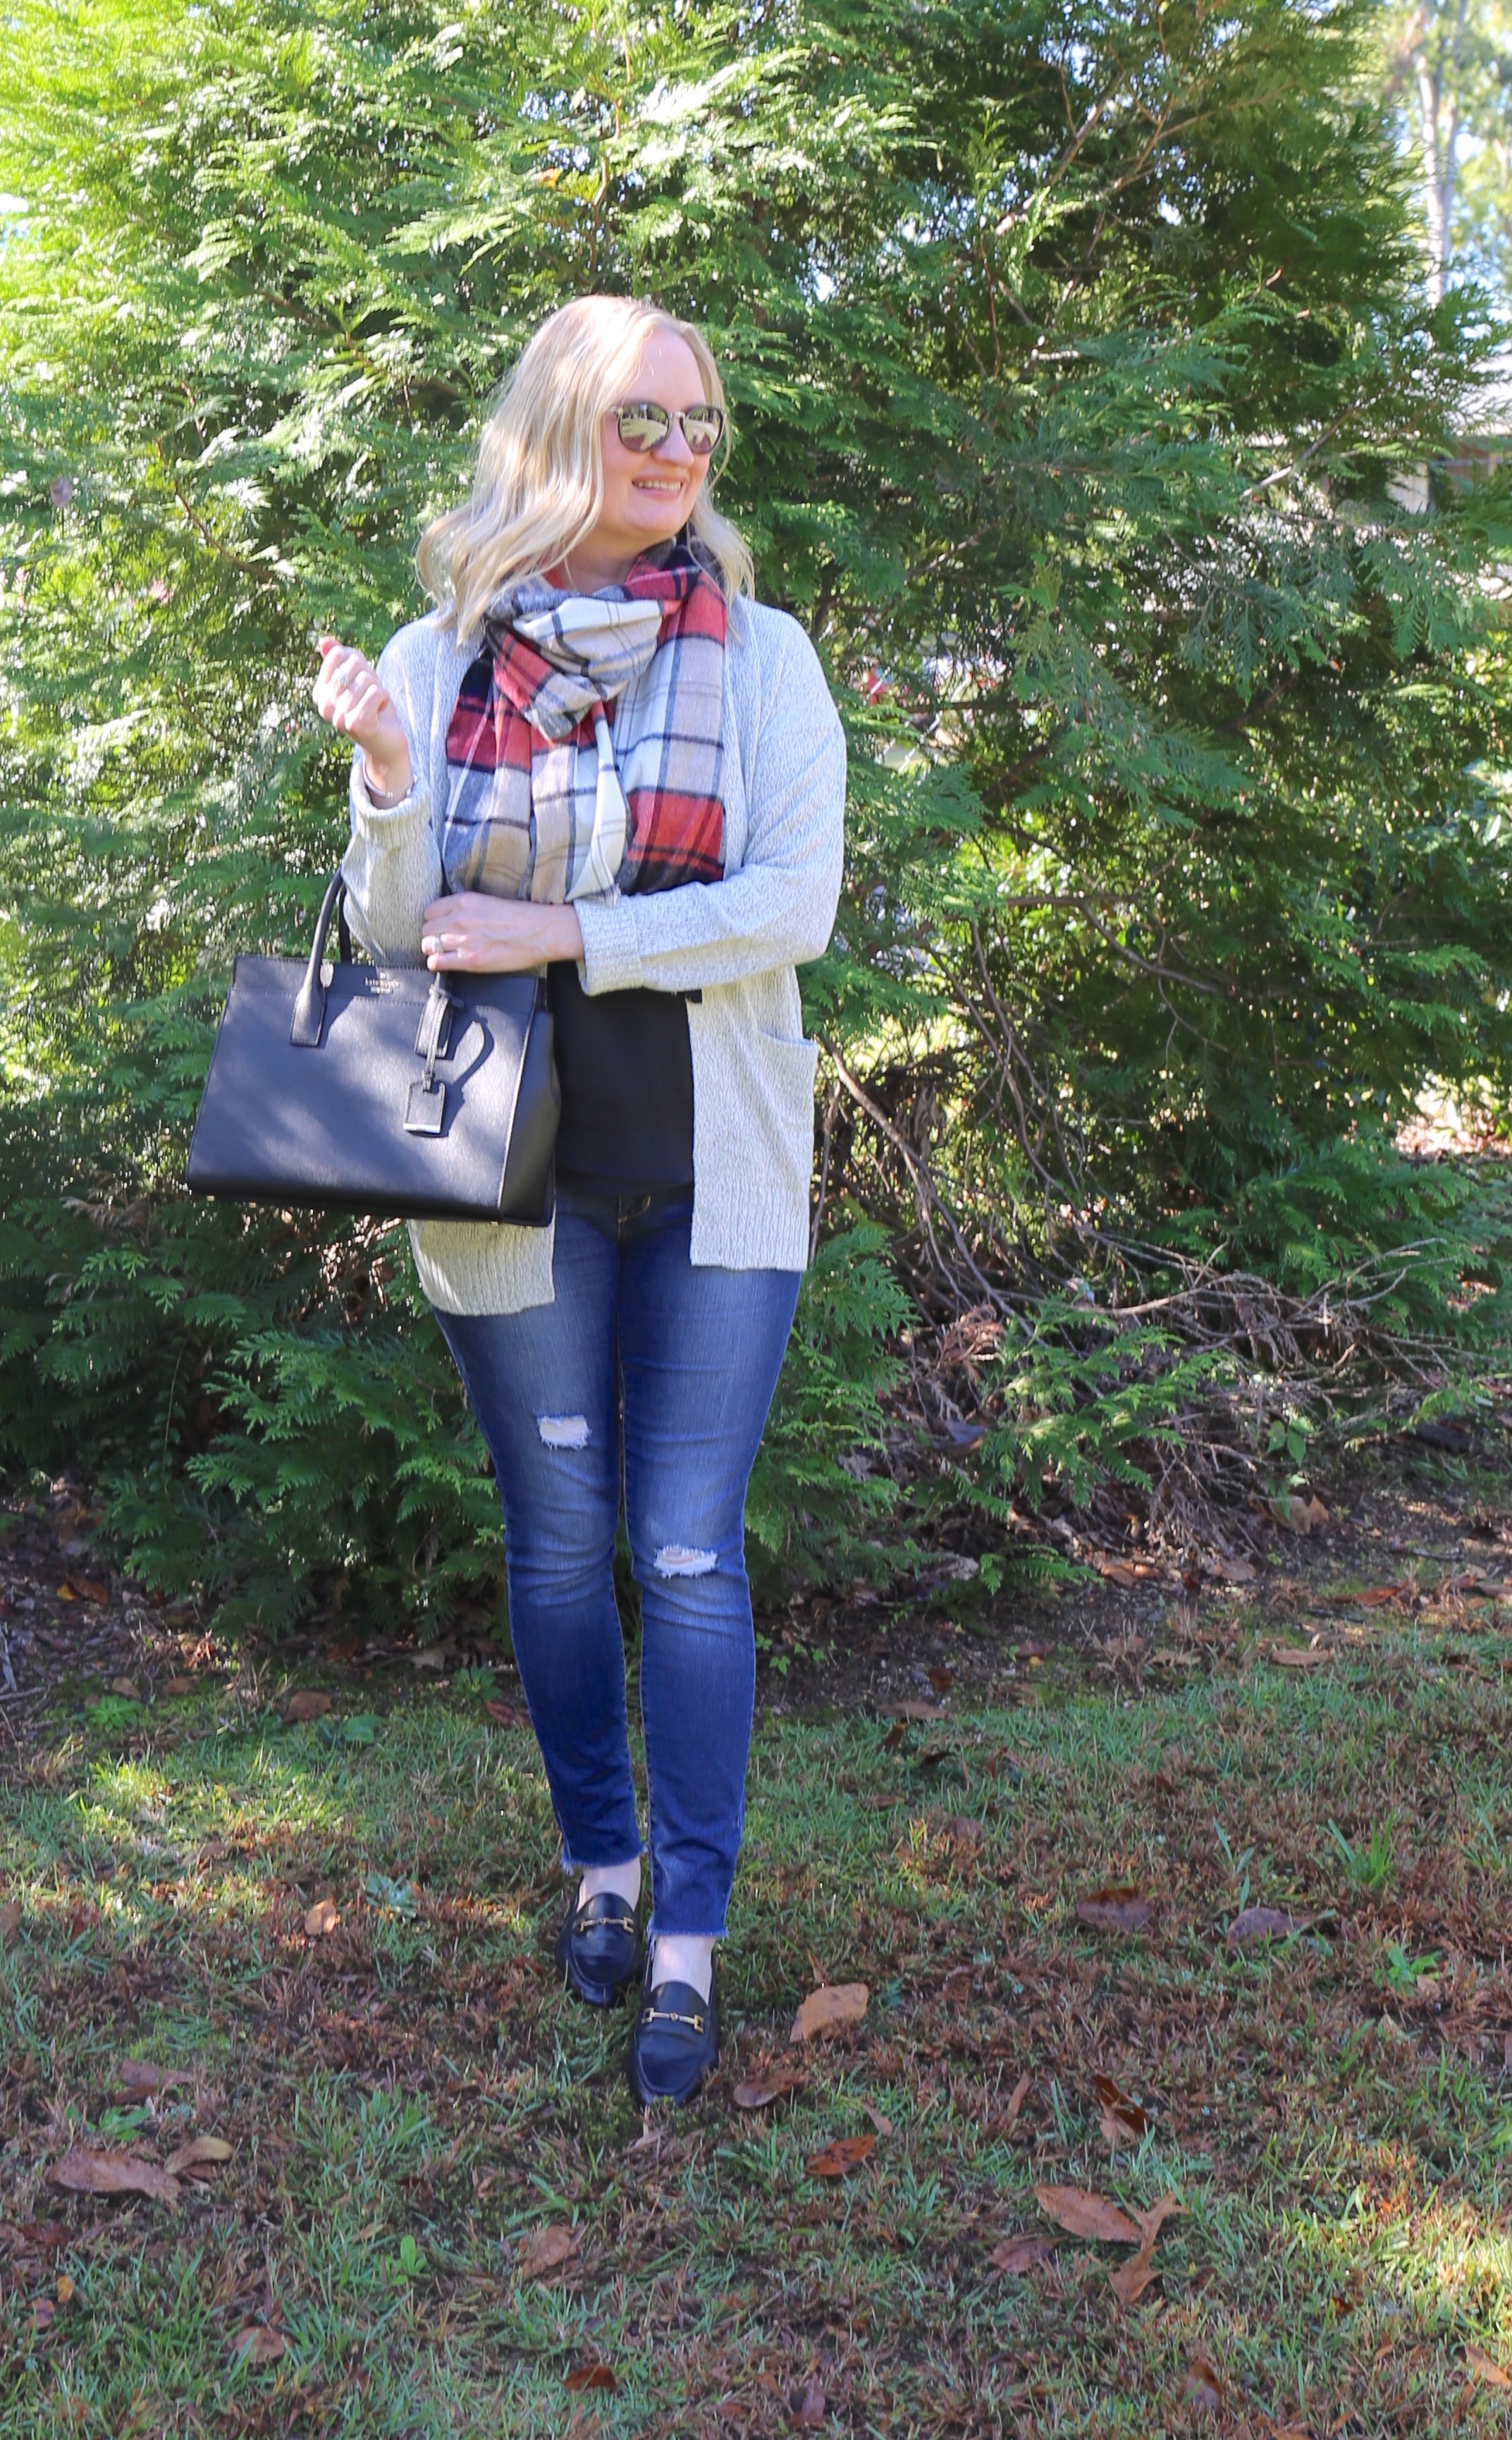 Black Gray and Pop of Plaid 